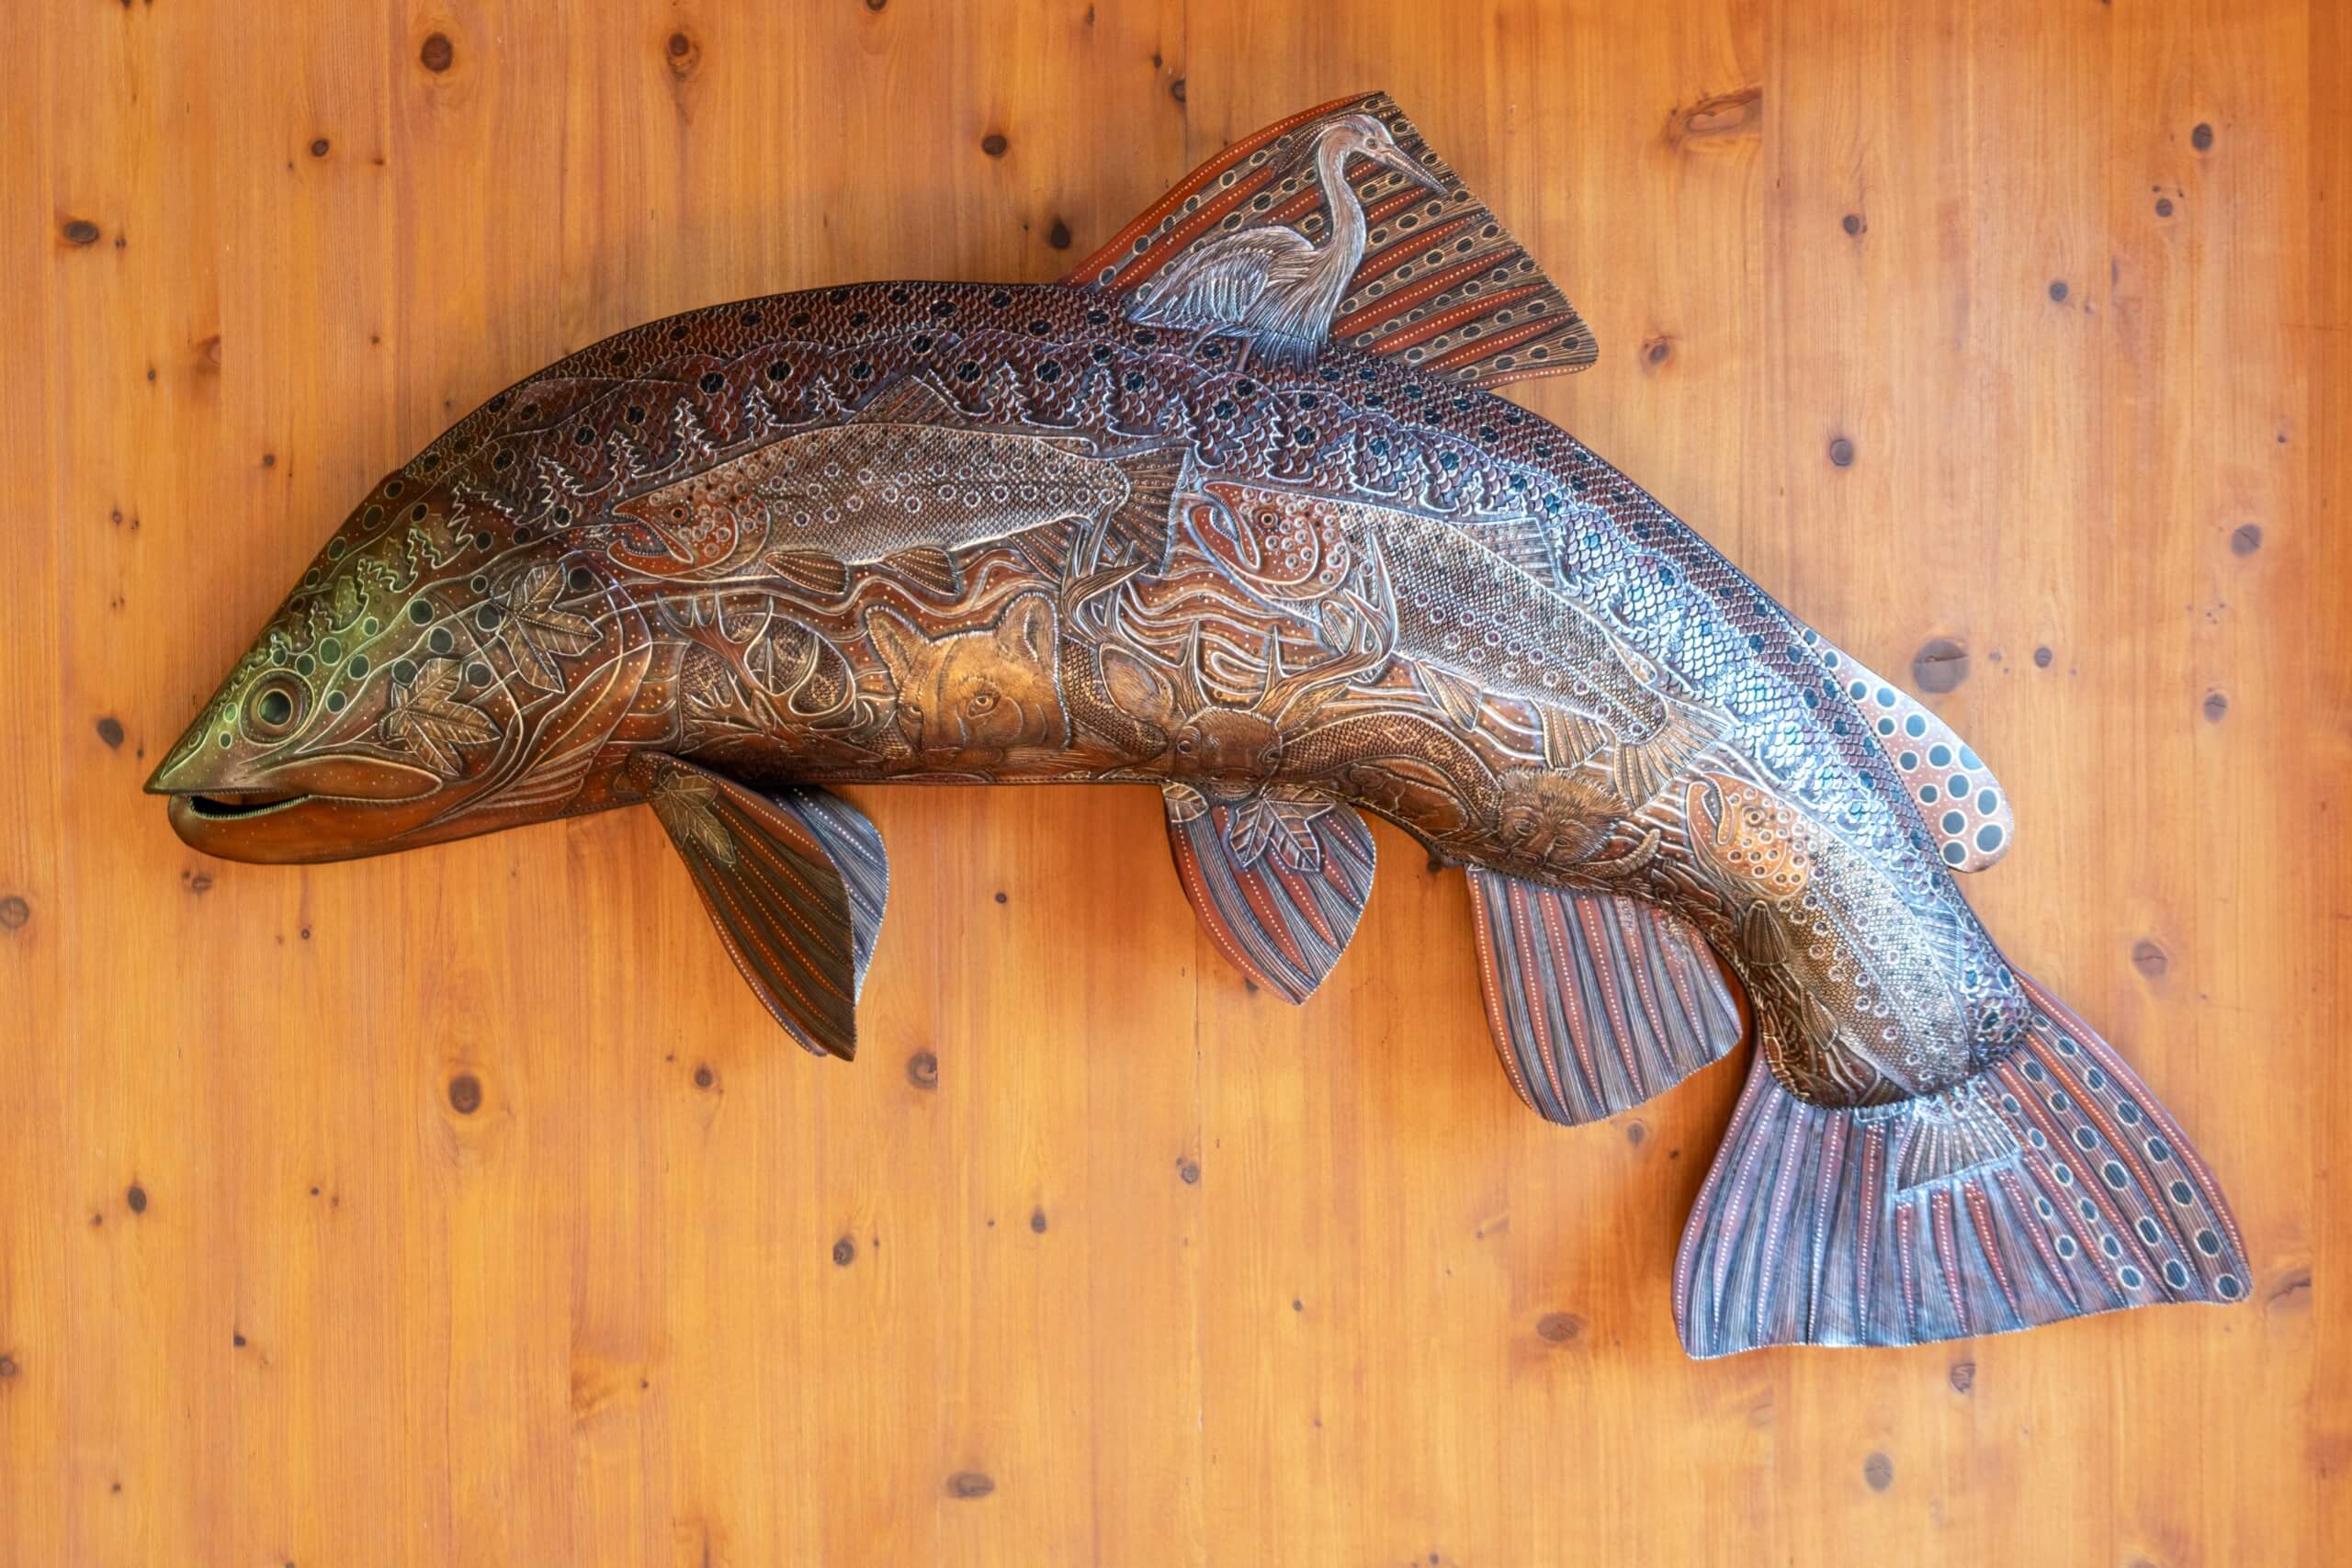 Fish art by Lance Boen hung on the wall at Triple Creek Ranch.